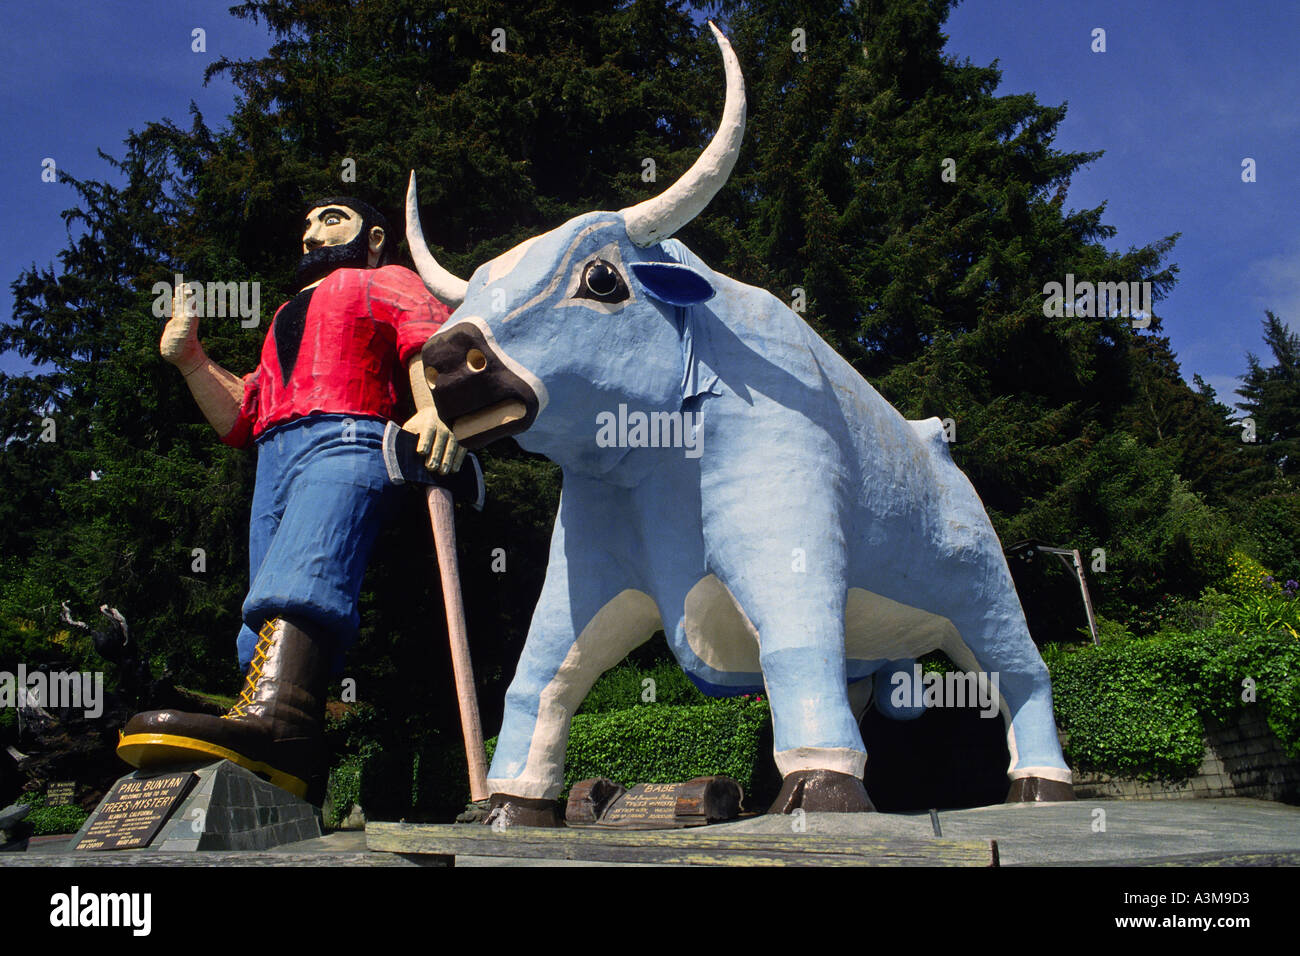 Large wooden carved statue of American folk legend Paul Bunyan and Babe the Blue Ox near the Trees of Mystery Klamath California Stock Photo